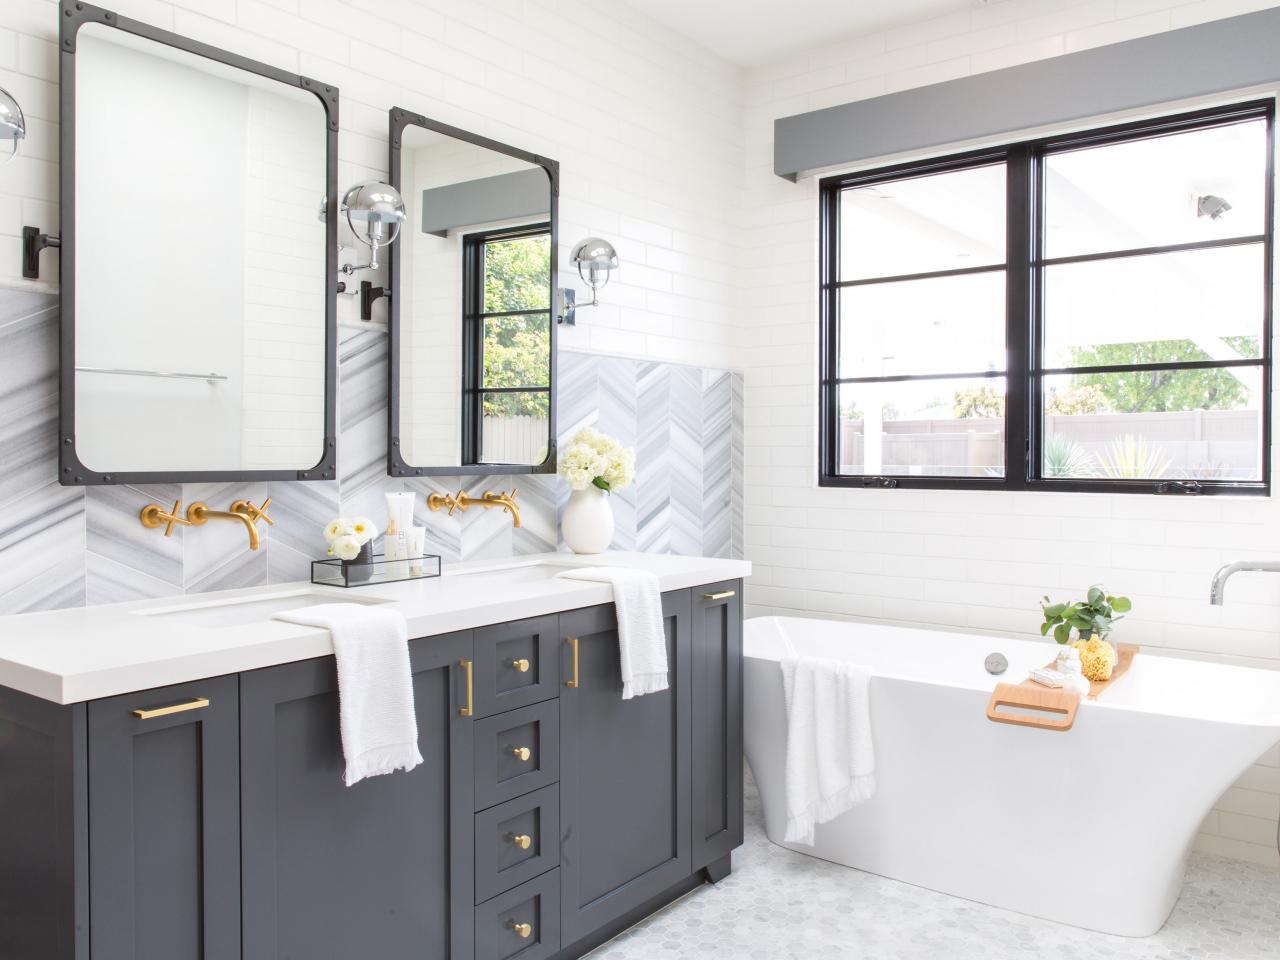 11 Items to Give Your Bathroom an Immediate Spring Refresh